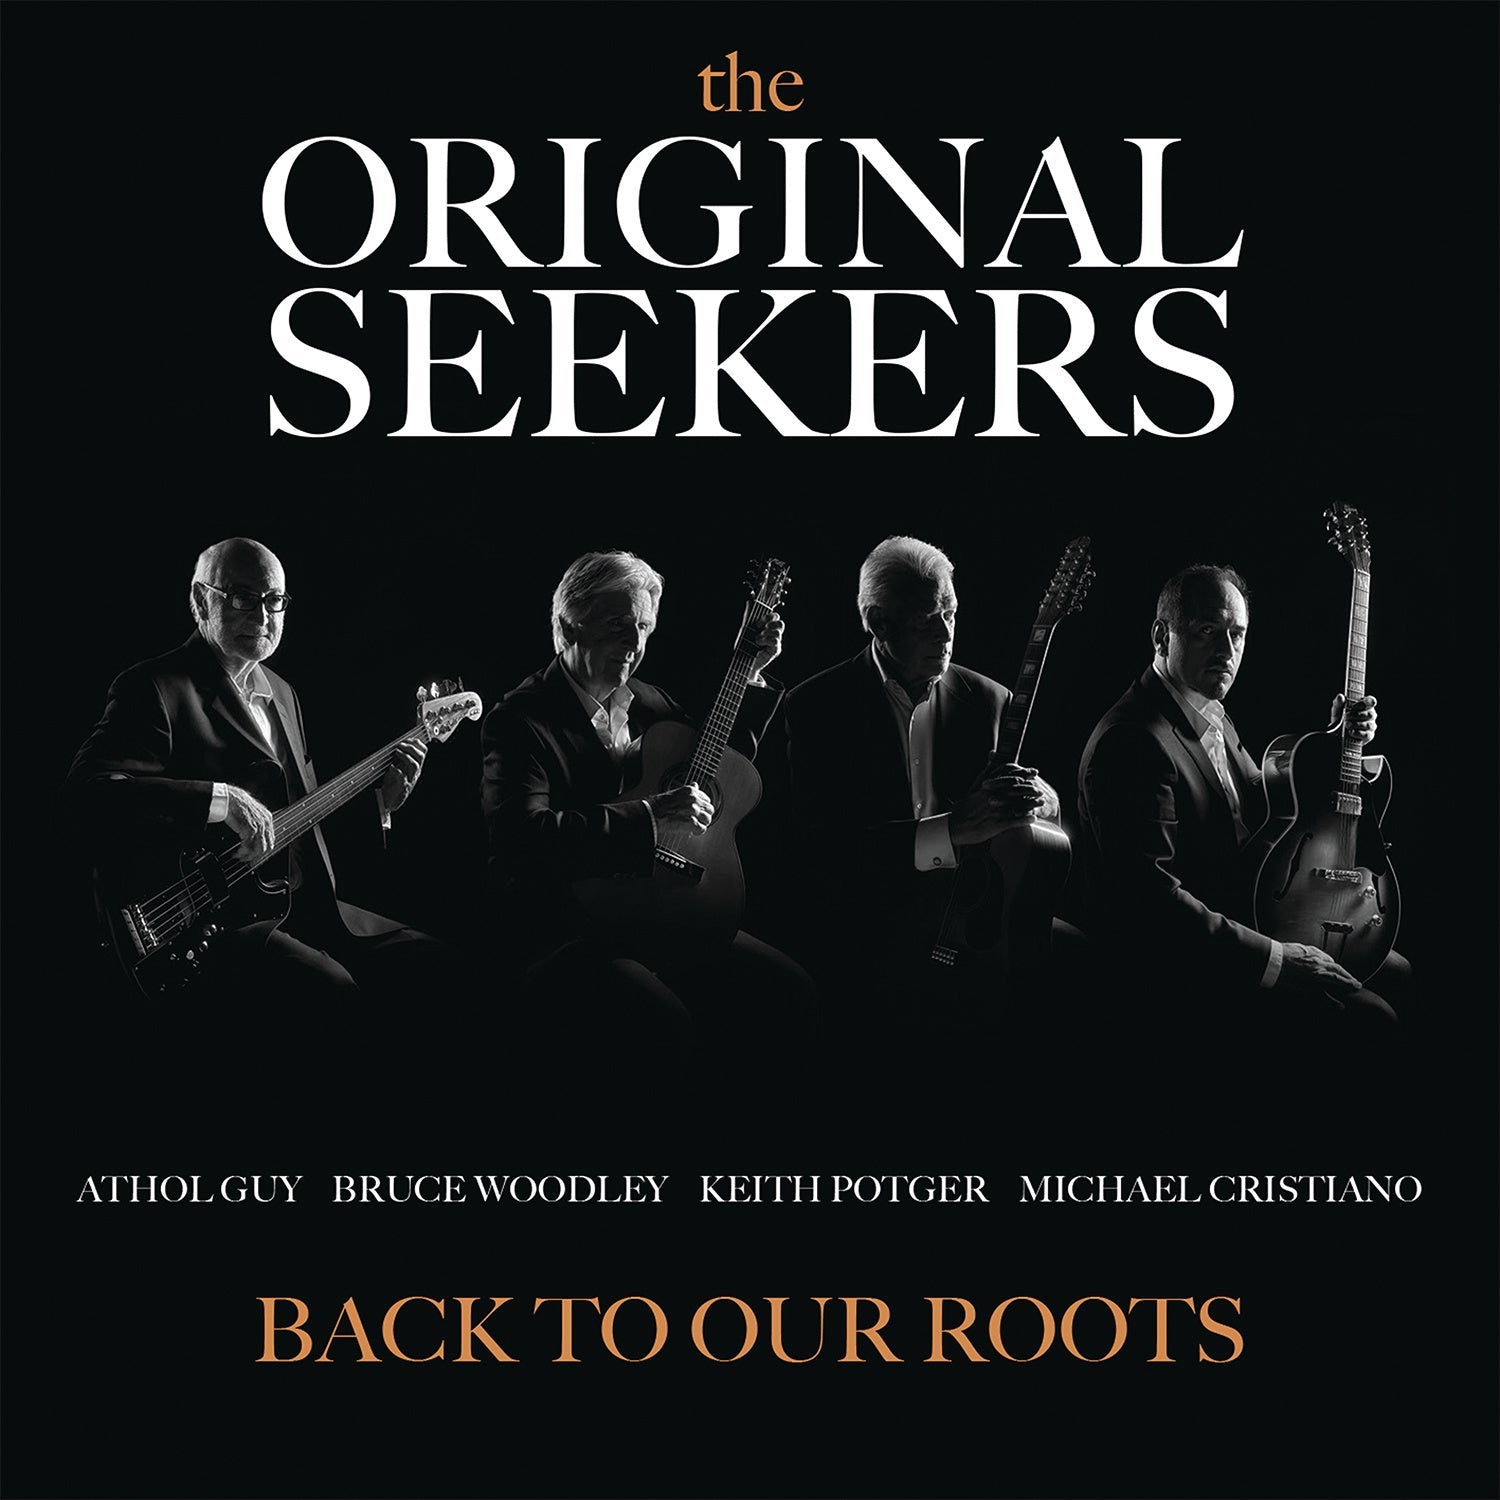 THE ORIGINAL SEEKERS - BACK TO OUR ROOTS